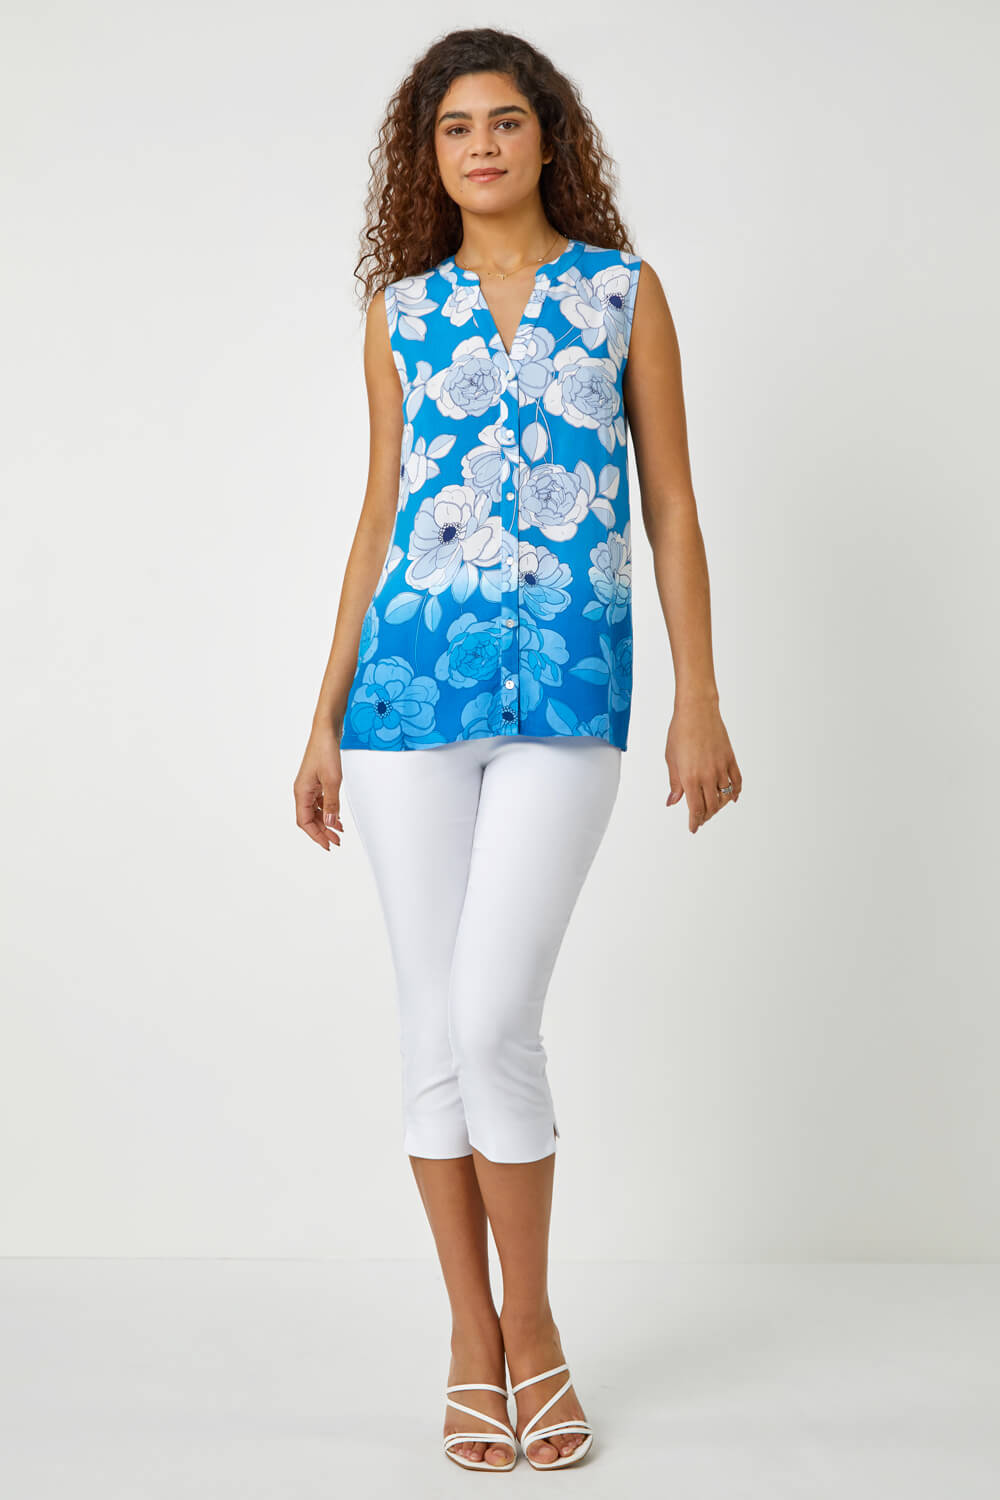 Blue Sleeveless Floral Print Blouse, Image 2 of 5